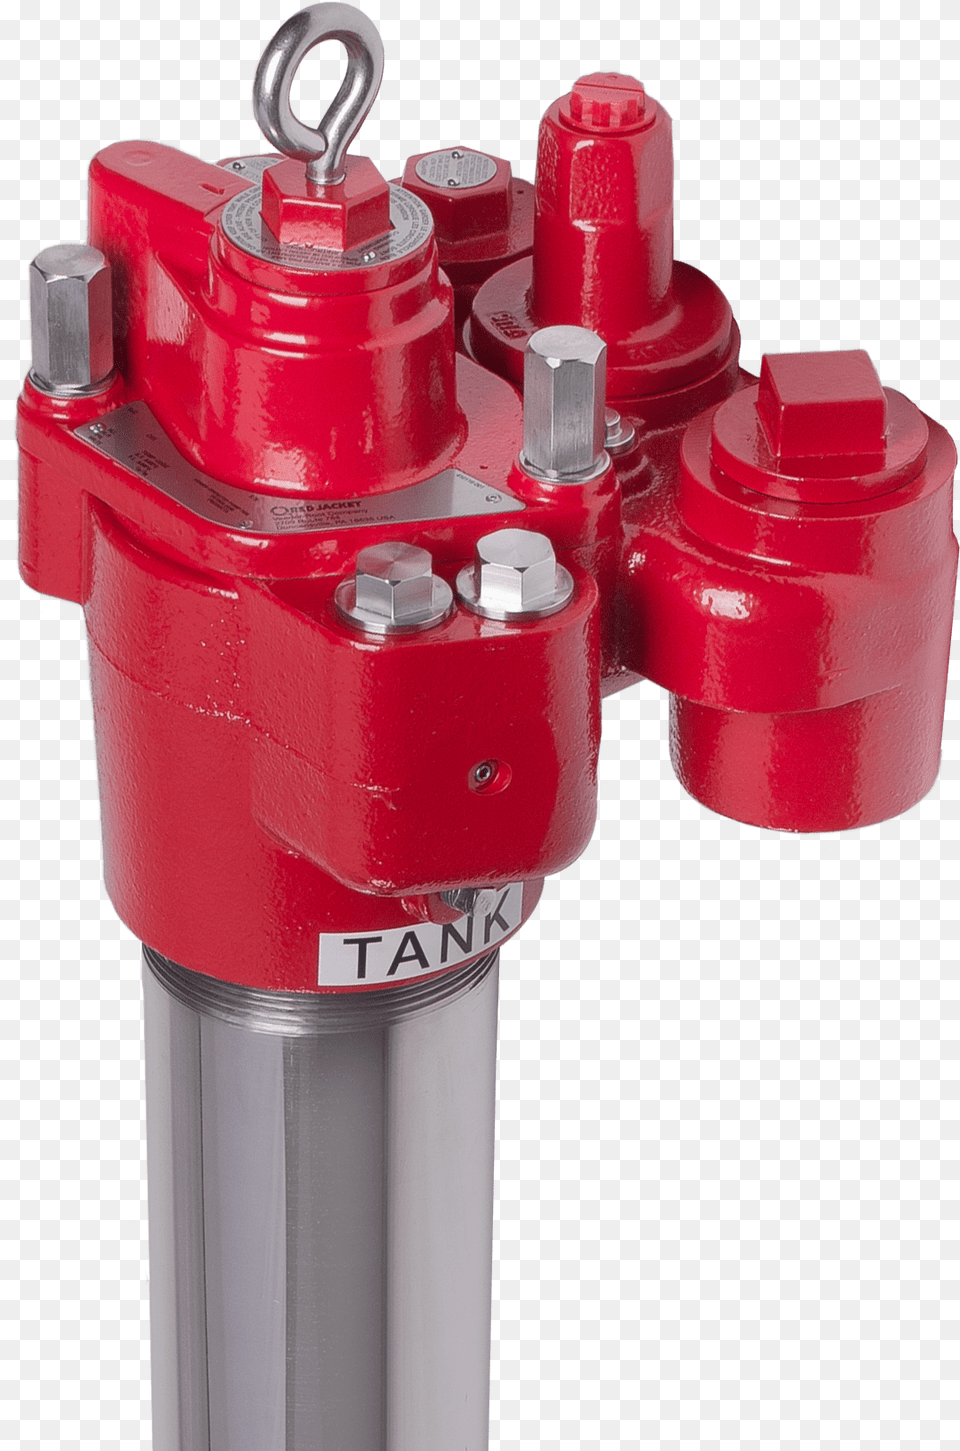 Red Armor Packer Head Ball Valve, Machine, Fire Hydrant, Hydrant Free Transparent Png